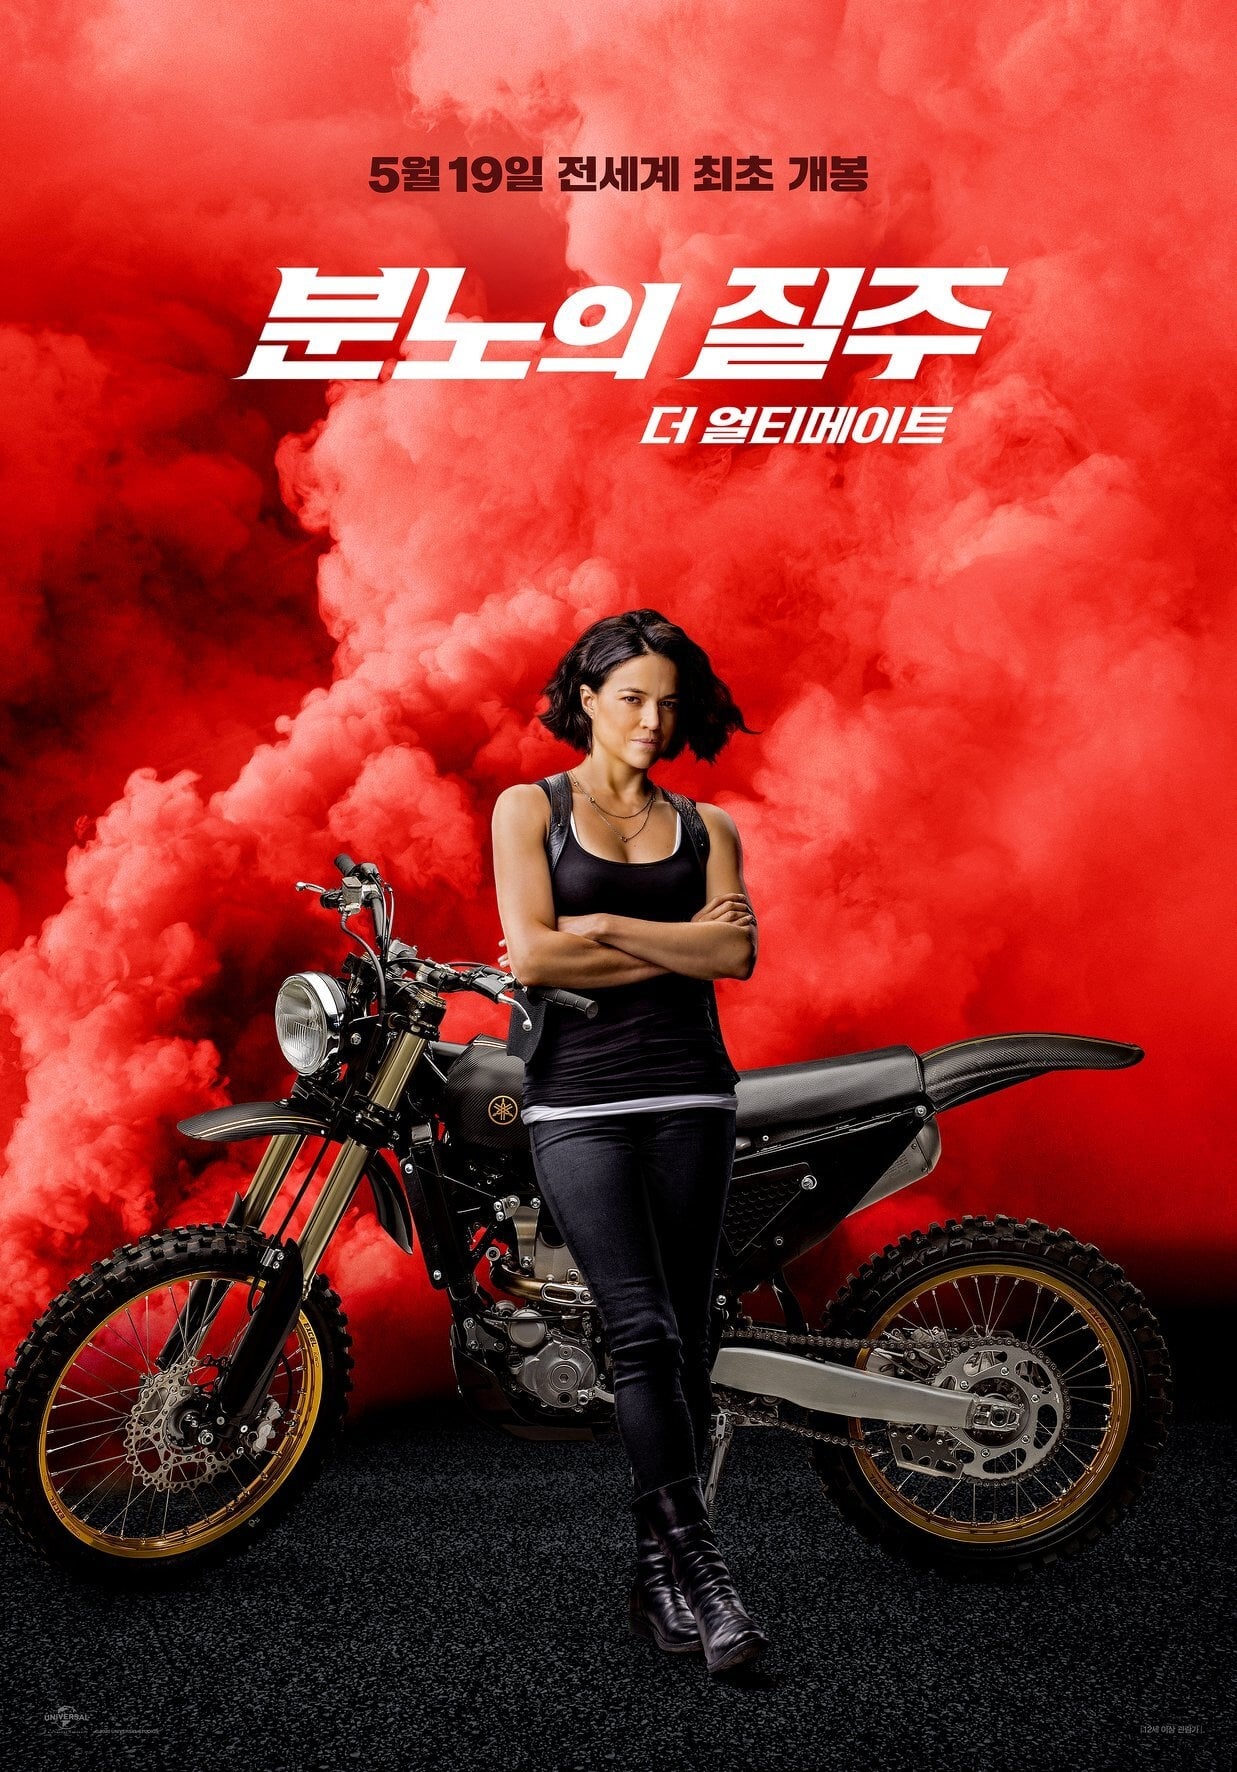 fast-and-furious-9-2021-character-poster-michelle-rodriguez-as